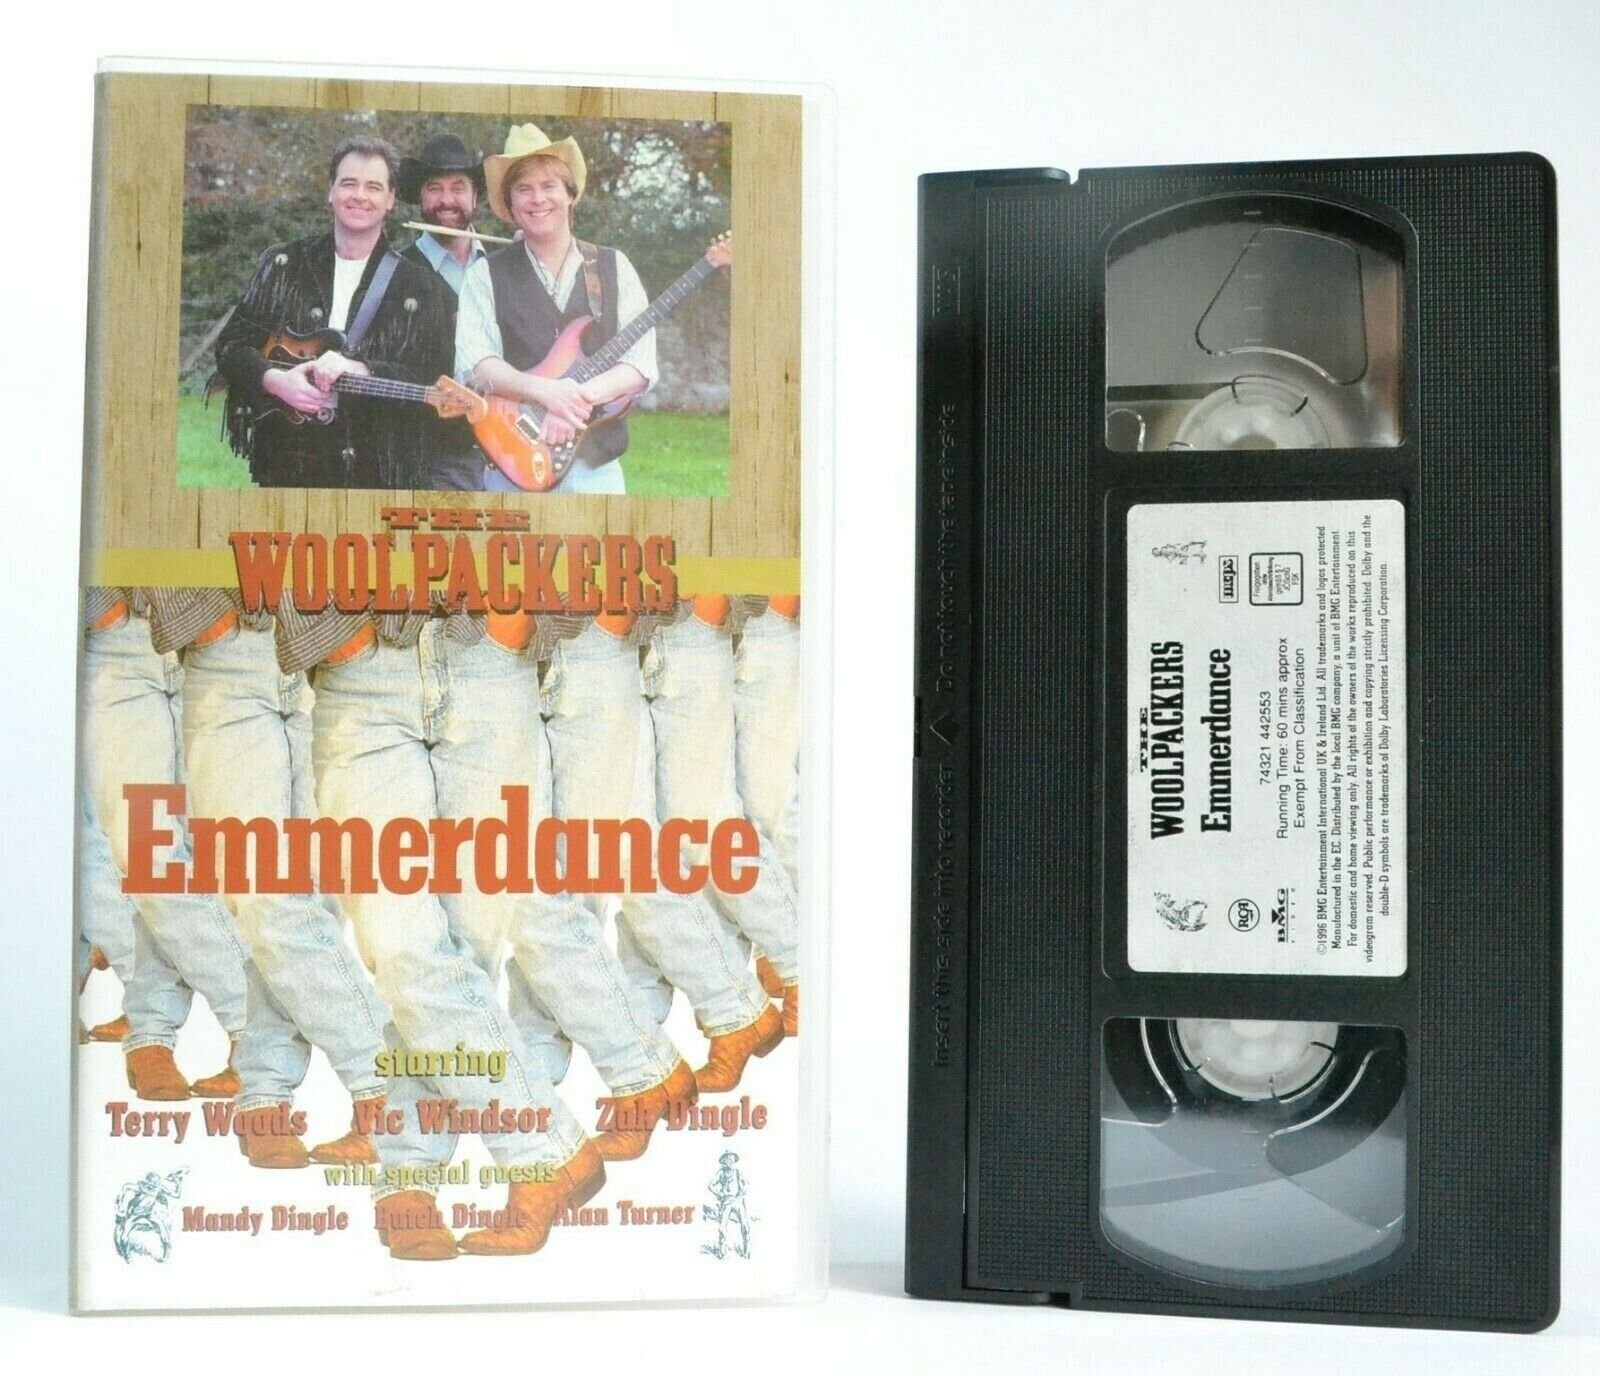 The Woolpackers: Emmerdance - Terry Woods - Mandy Dingle - Music Show - Pal VHS-